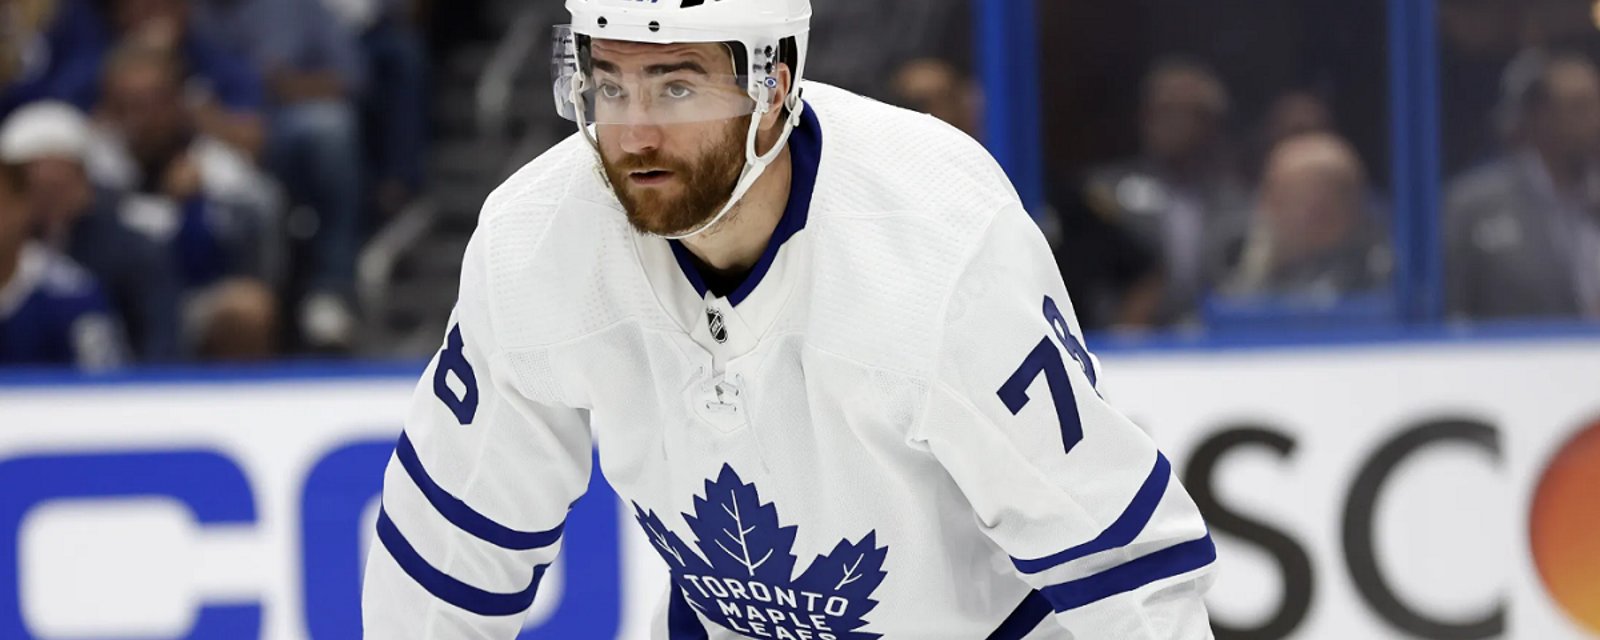 Rumor: Maple Leafs looking to move T.J. Brodie for another defenseman.